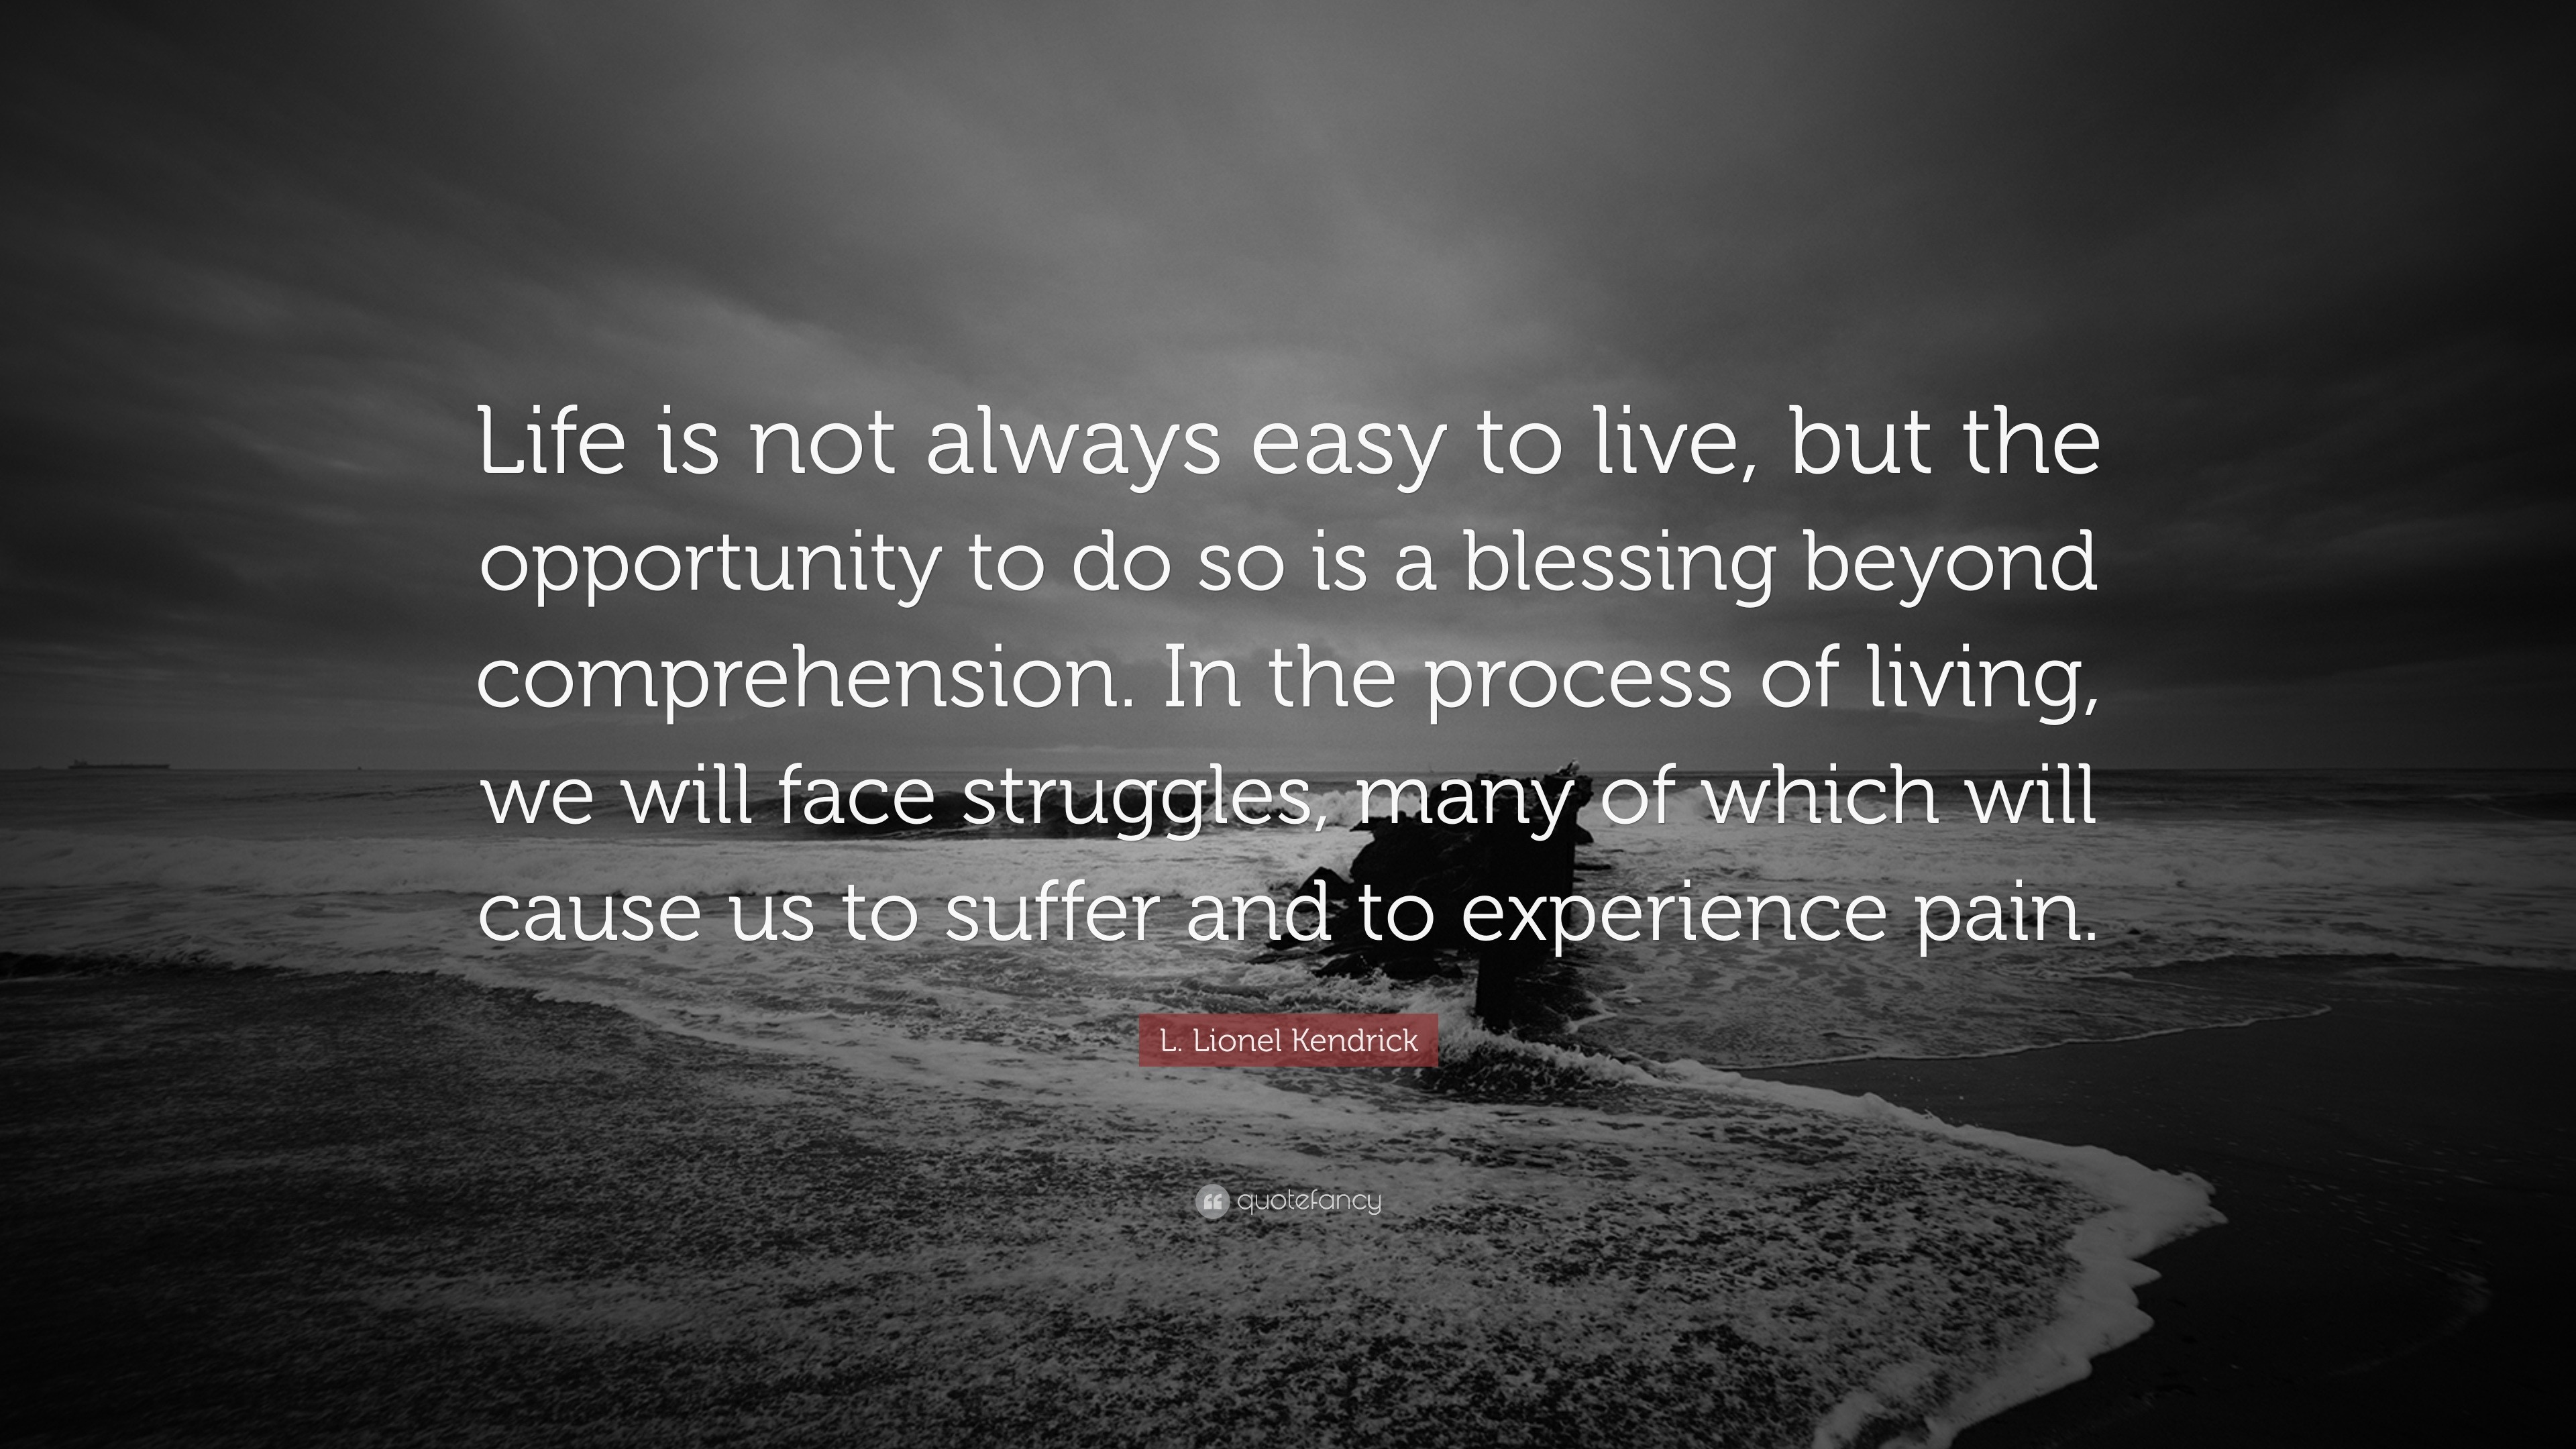 L. Lionel Kendrick Quote: “Life is not always easy to live, but the ...